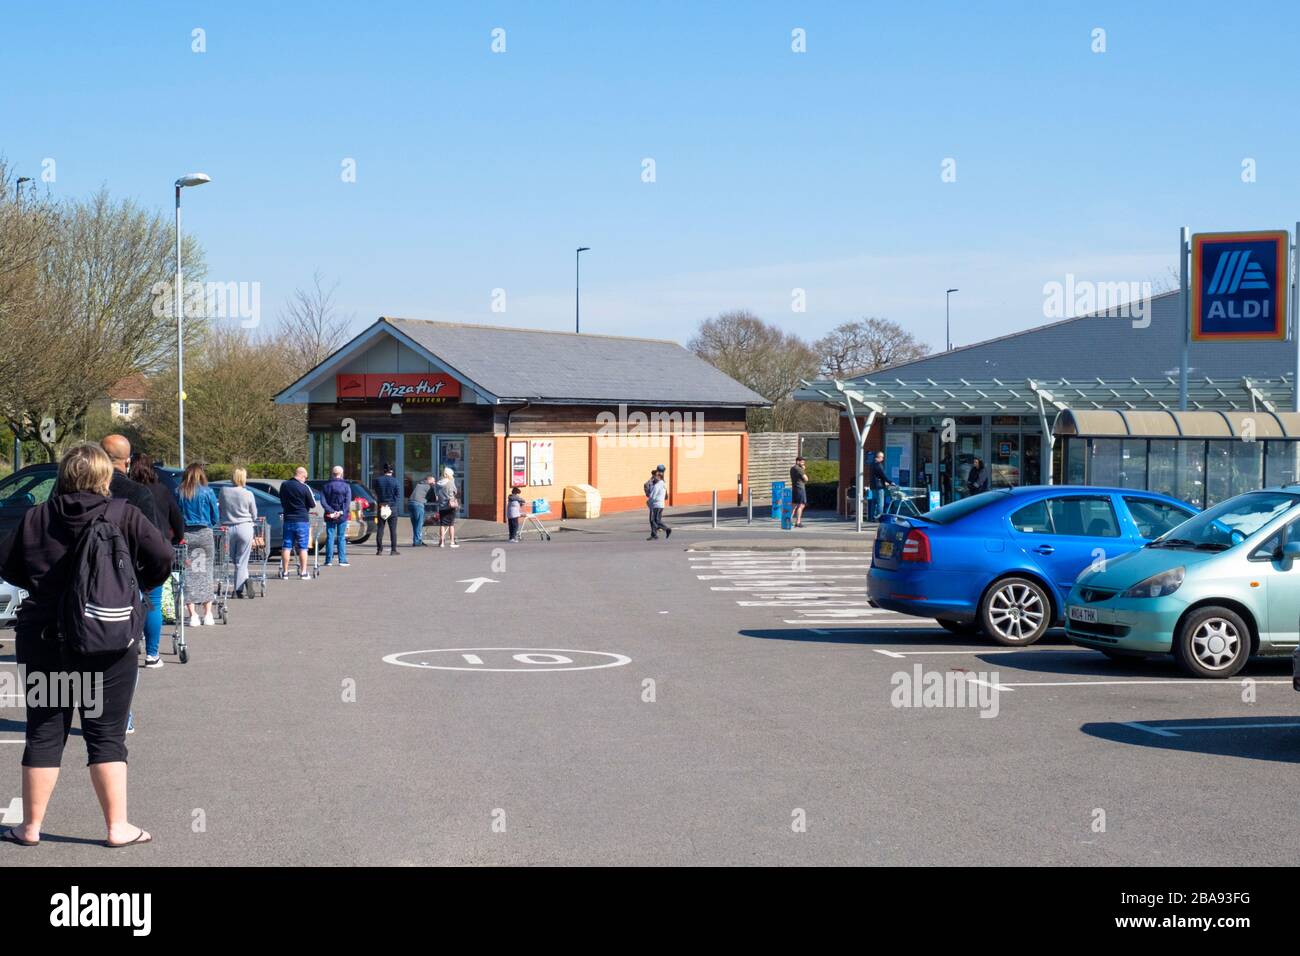 Bradley Stoke, Gloucestershire, UK, 26th March 2020. On day3 of the Corvid 19 lockdown in the UK a  long queue forms for the ALDI supermarket in Bradley Stoke. Shoppers comply with social distancing rules by standing 2 or more metres apart.  Credit: Mr Standfast / Alamy Live News Stock Photo